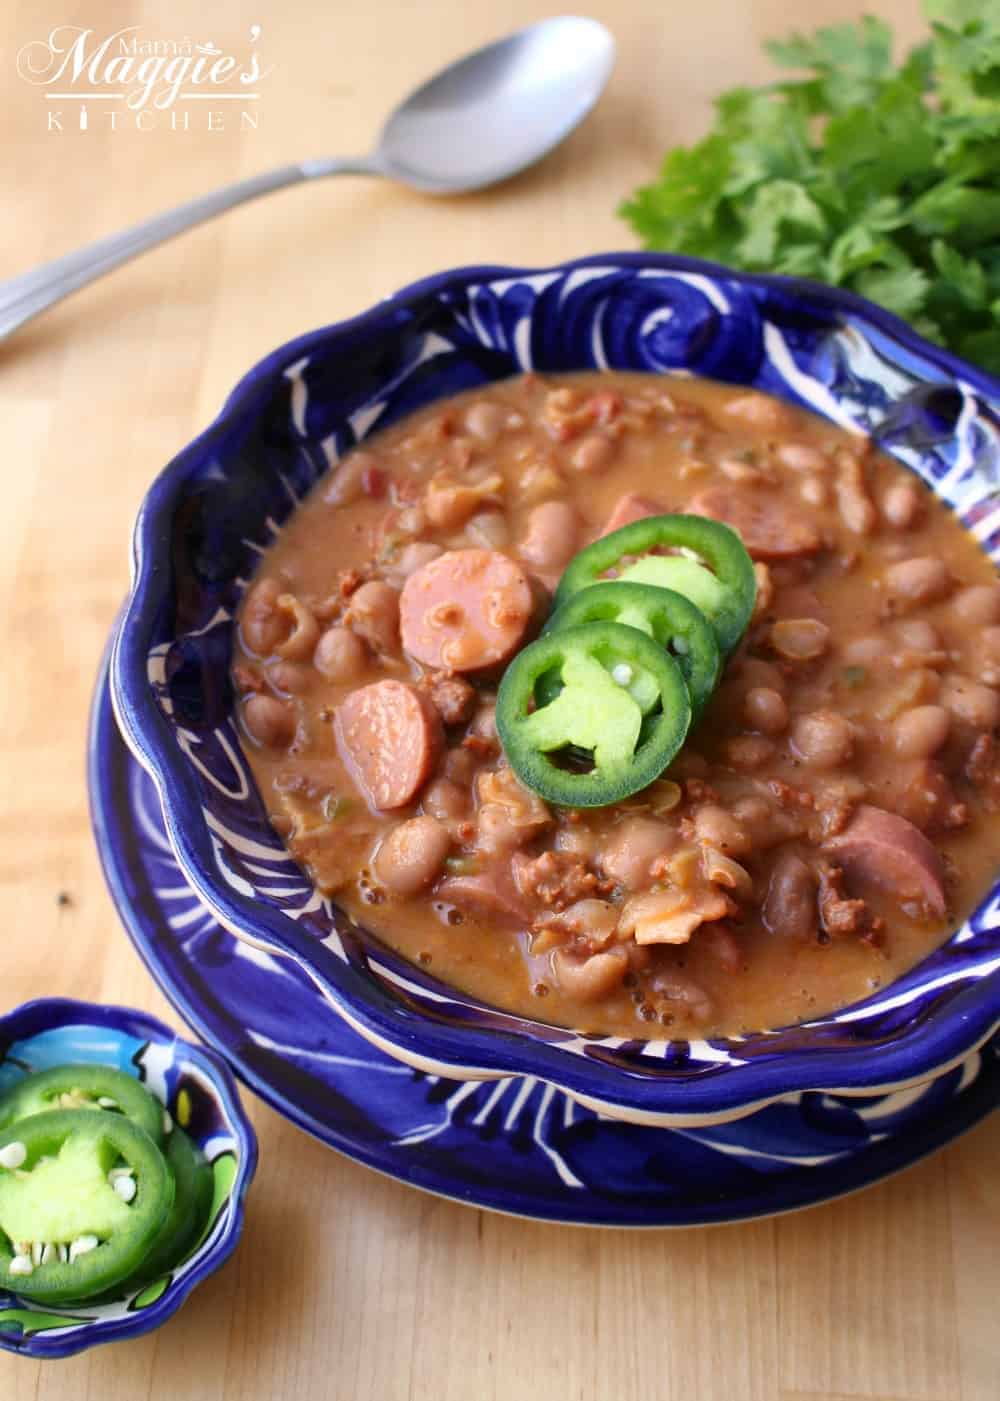 Charro Beans in a decorative blue bowl topped with jalapeno slices.